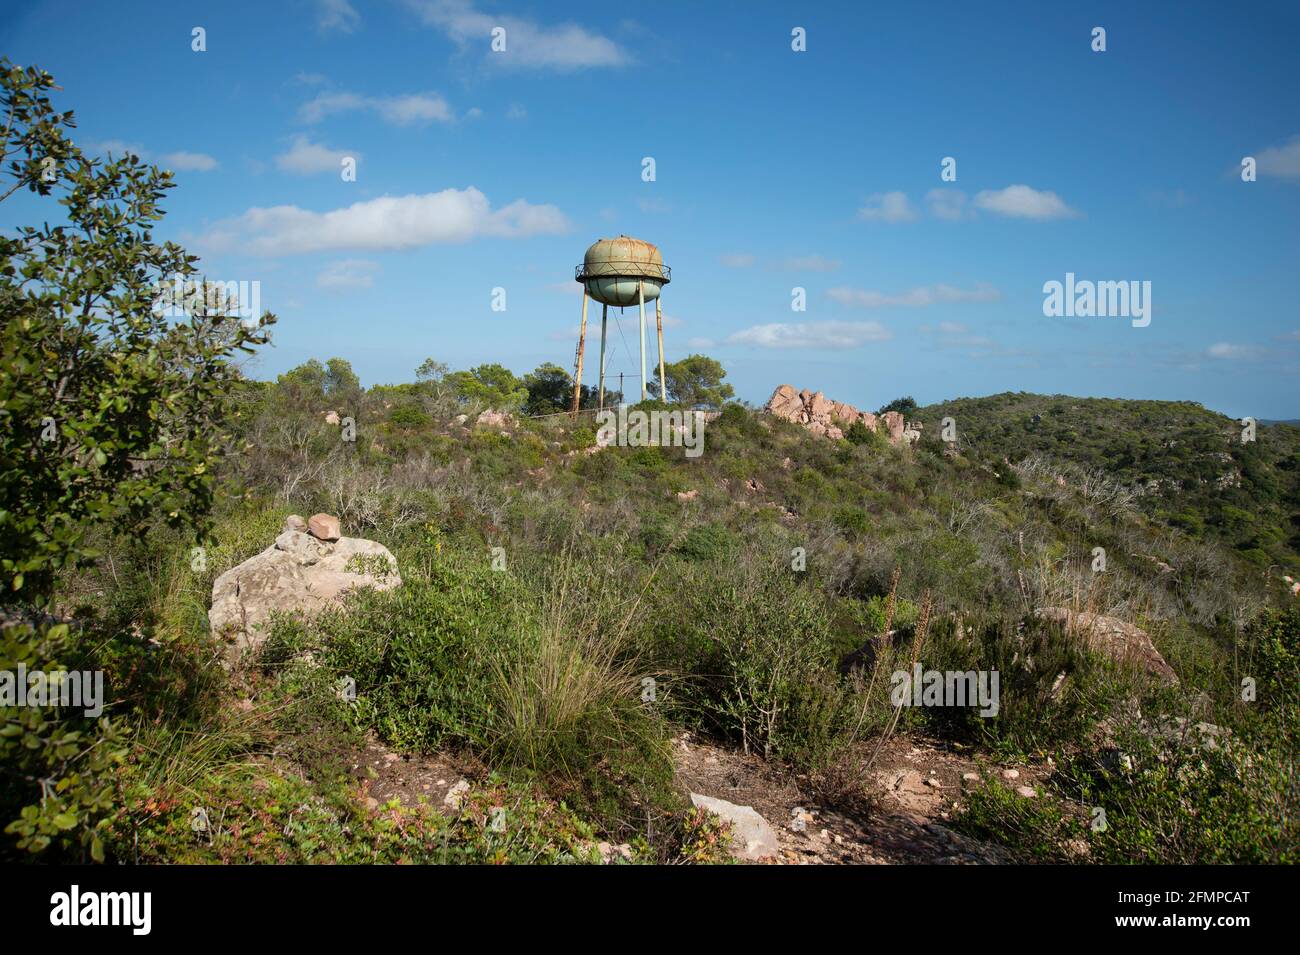 the old water storage tower at the American military base on the island of menorca spain Stock Photo